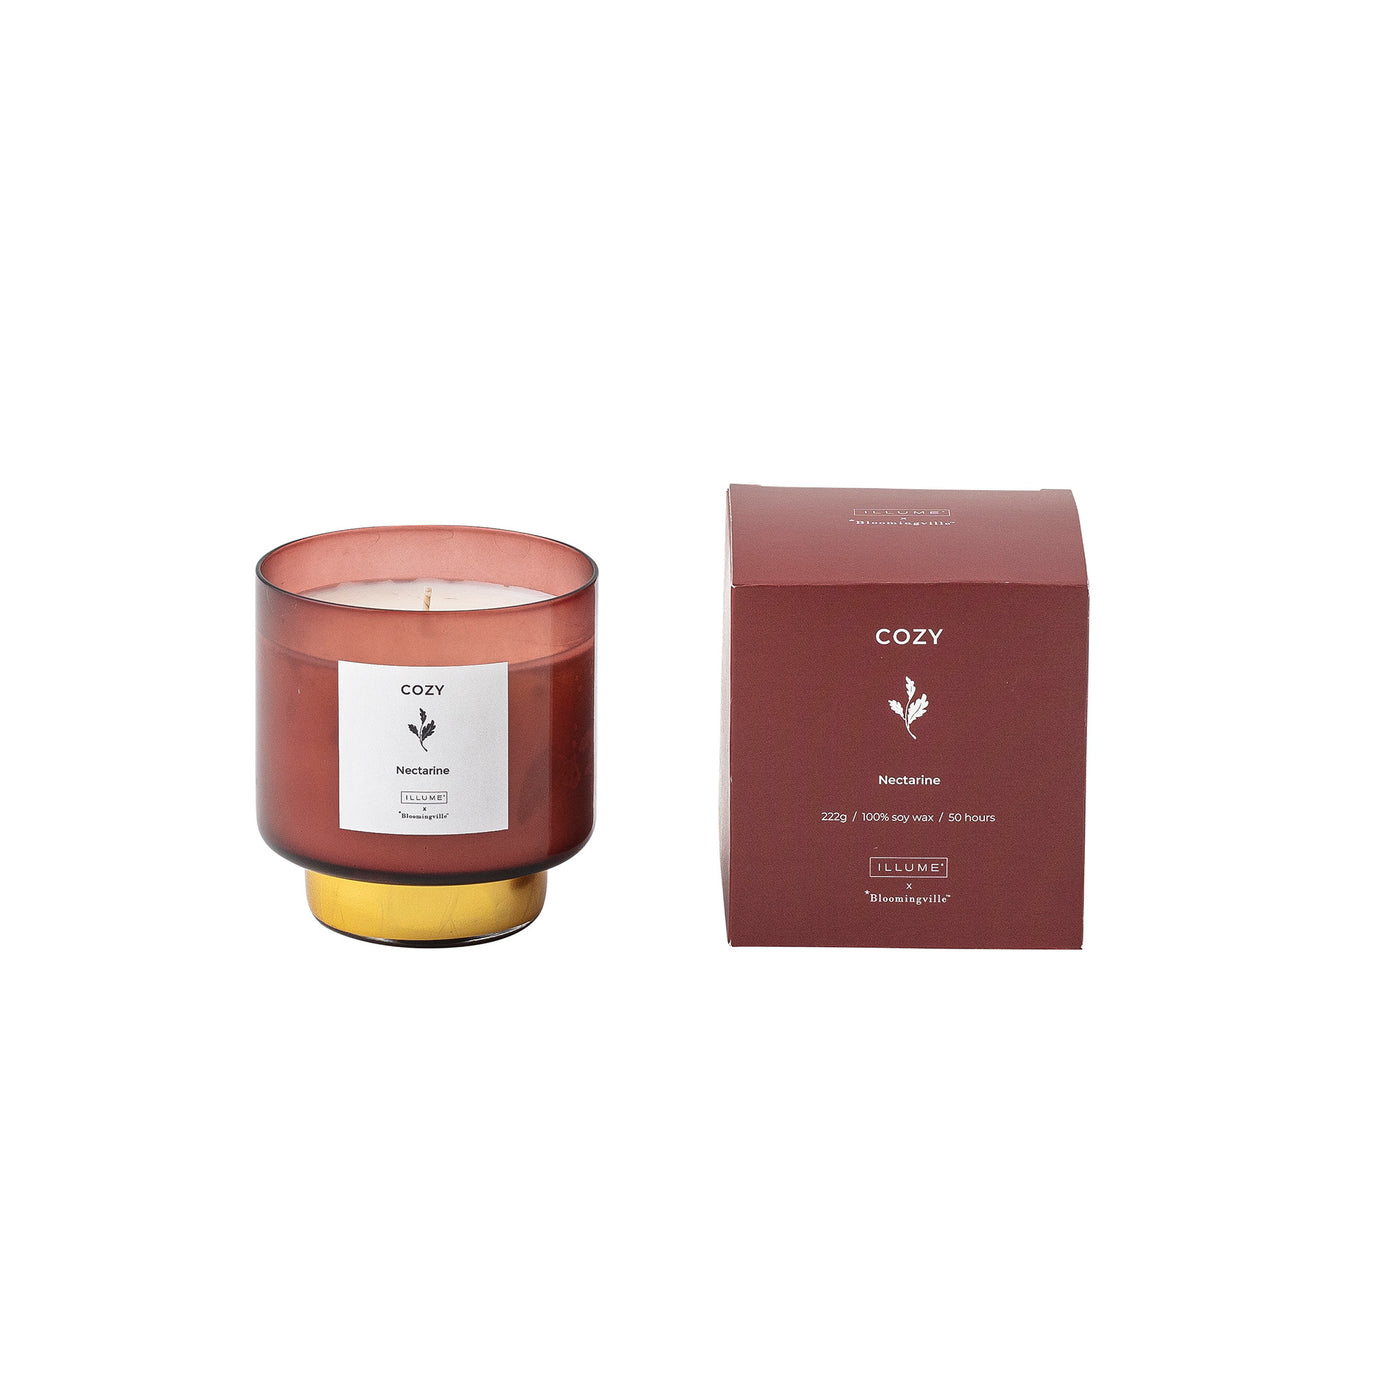 COZY - Nectarine Scented Candle